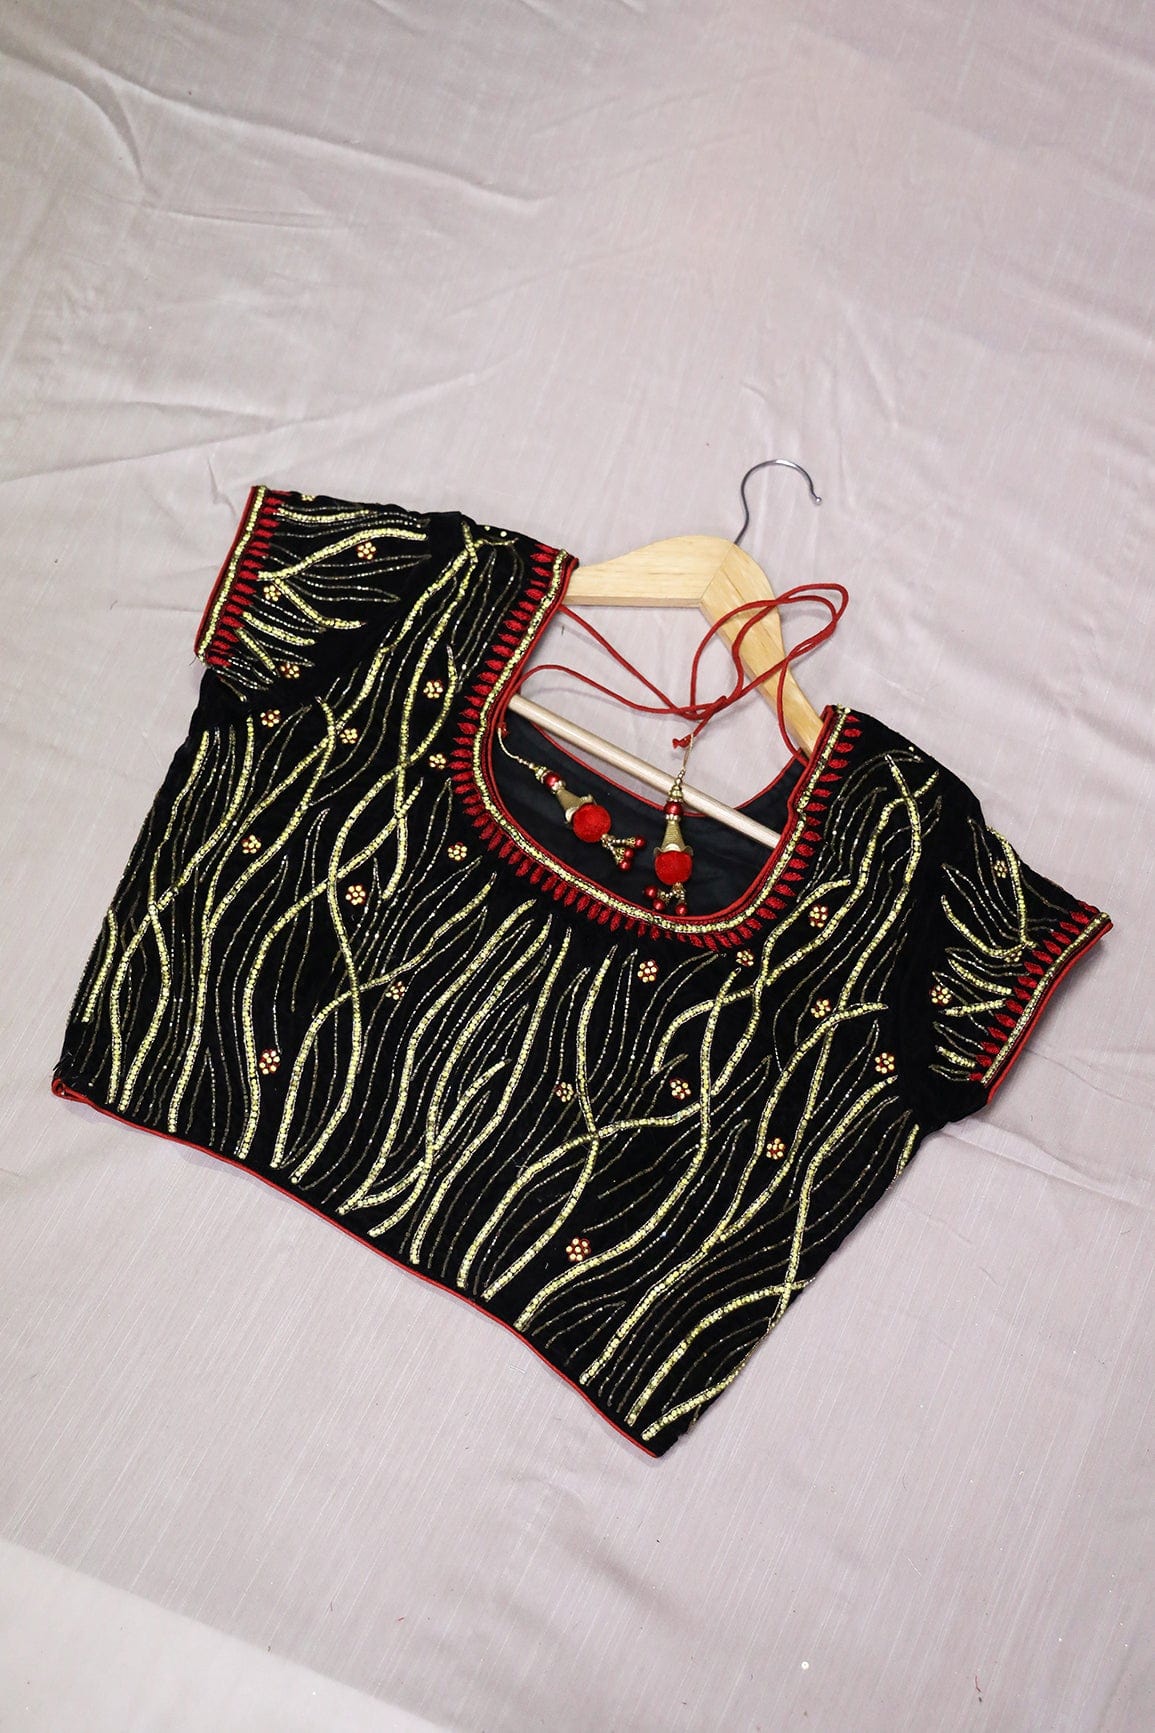 doeraa Blouse Black Hand Work Embroidery Velvet Stitched Blouse